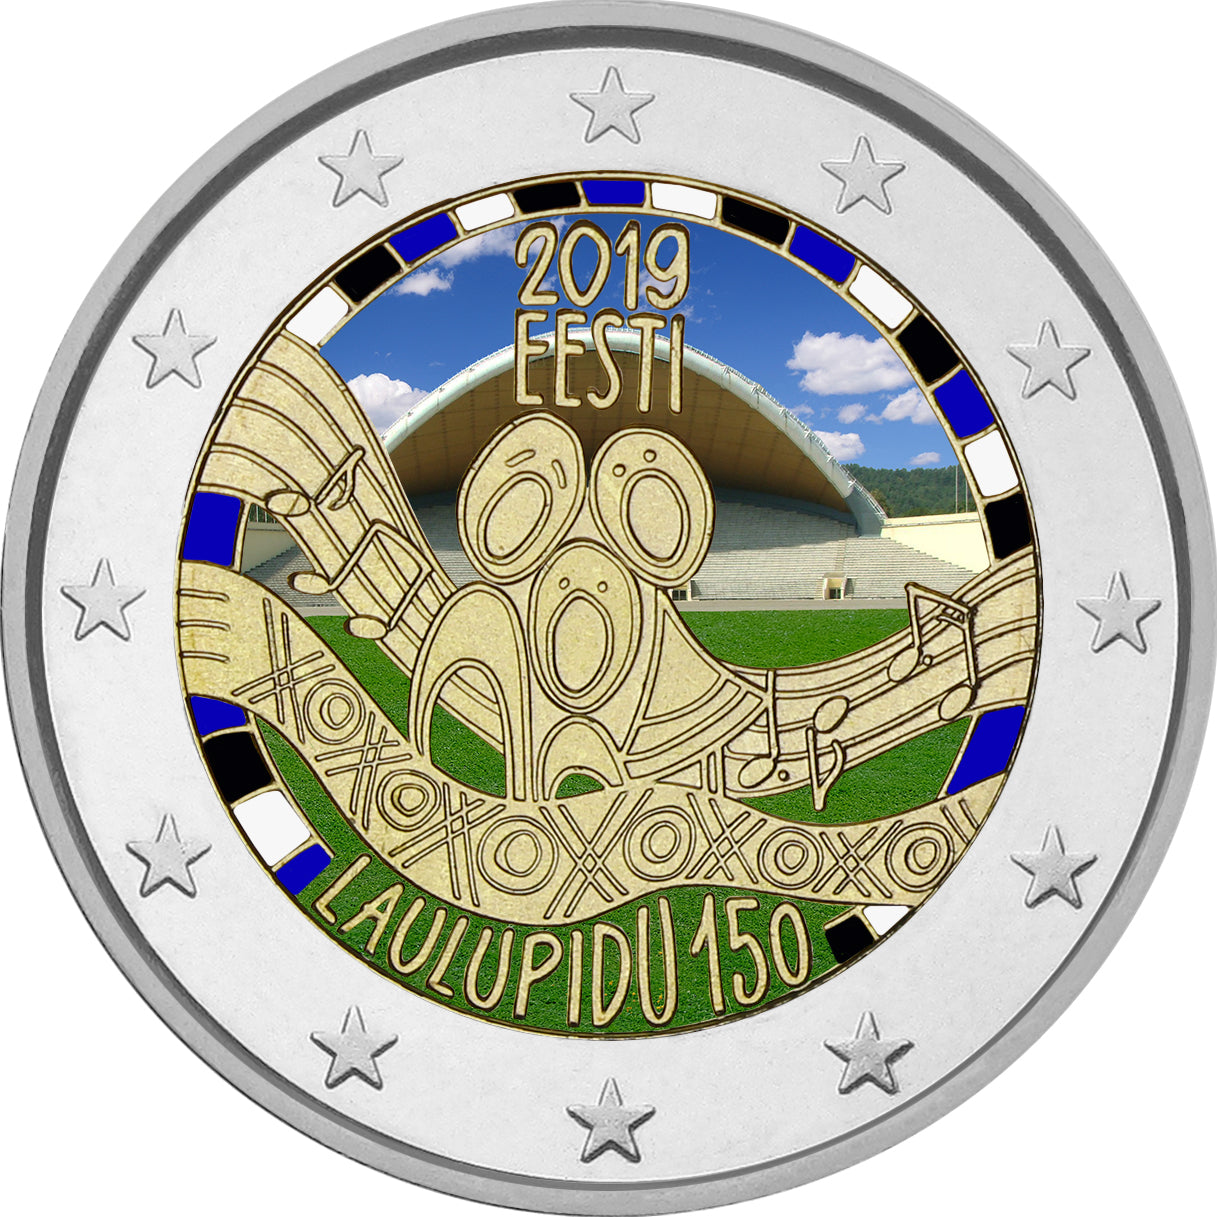 Estonia - 2 Euro Colored. 2019, 150 years of song festival